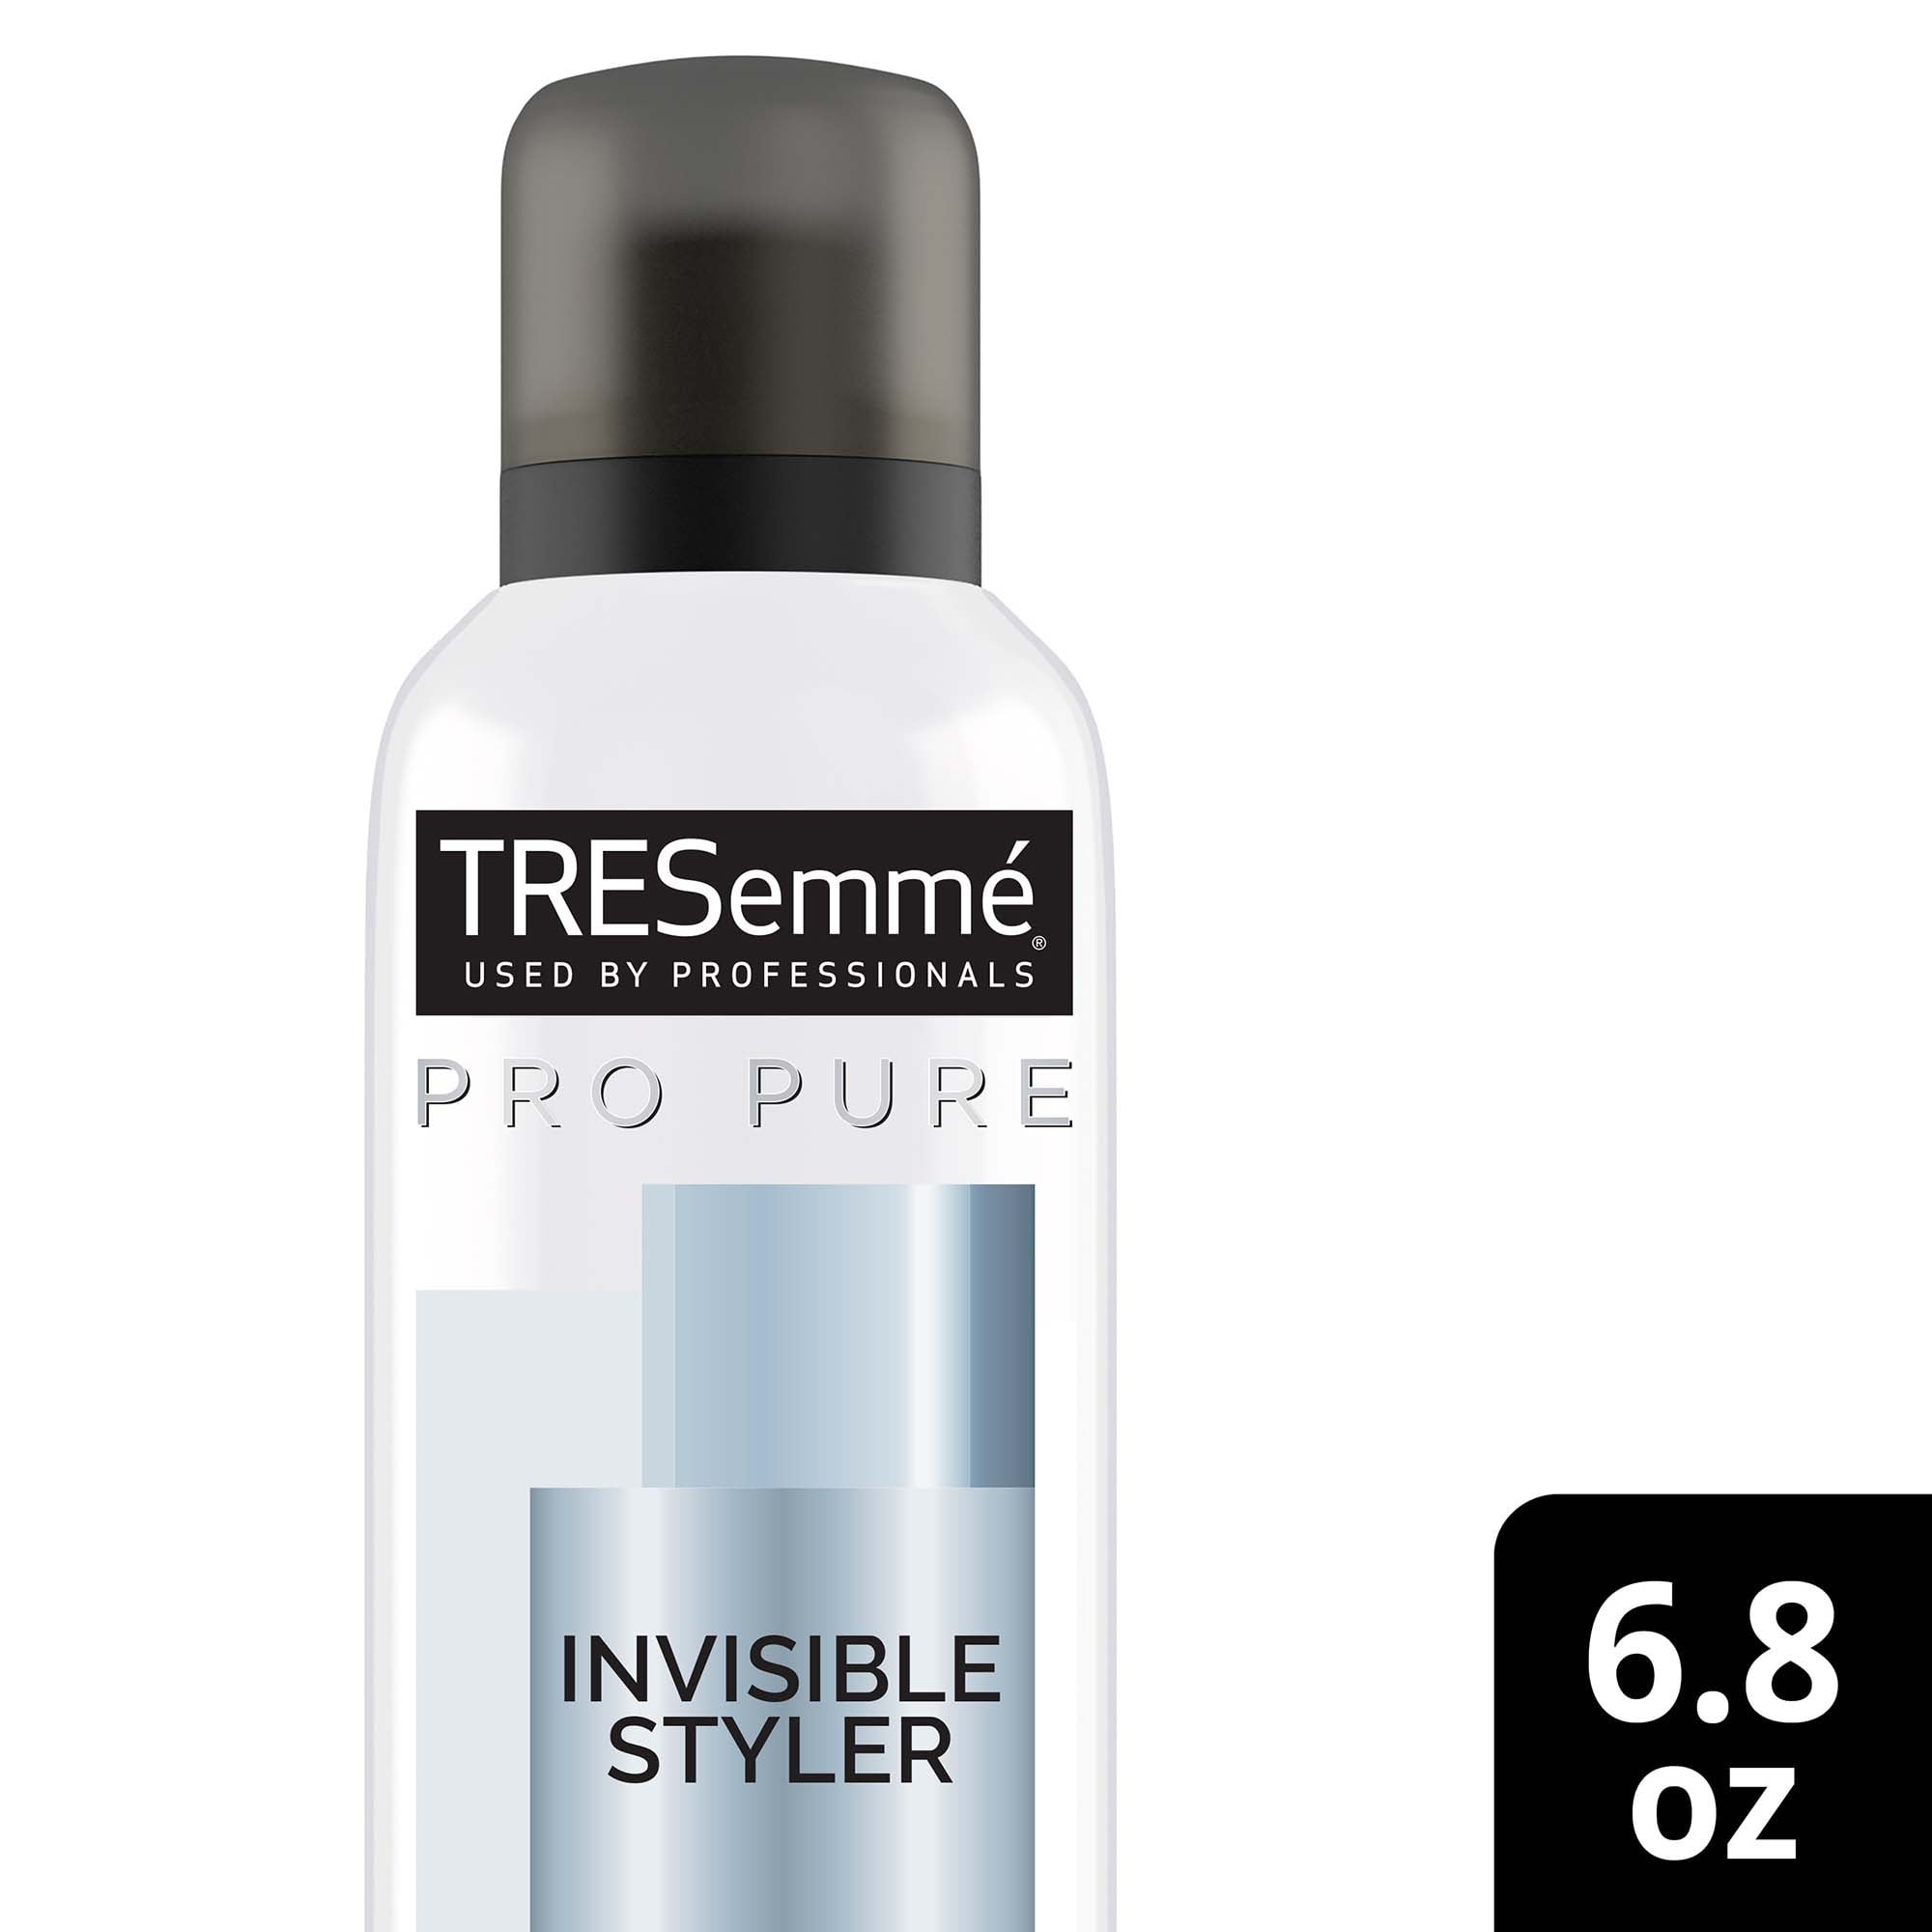 Tresemme Pro Pure Invisible Styler Hair Spray For Volume and Fine Hair Care  0% Alcohol, Parabens, Dyes  oz 